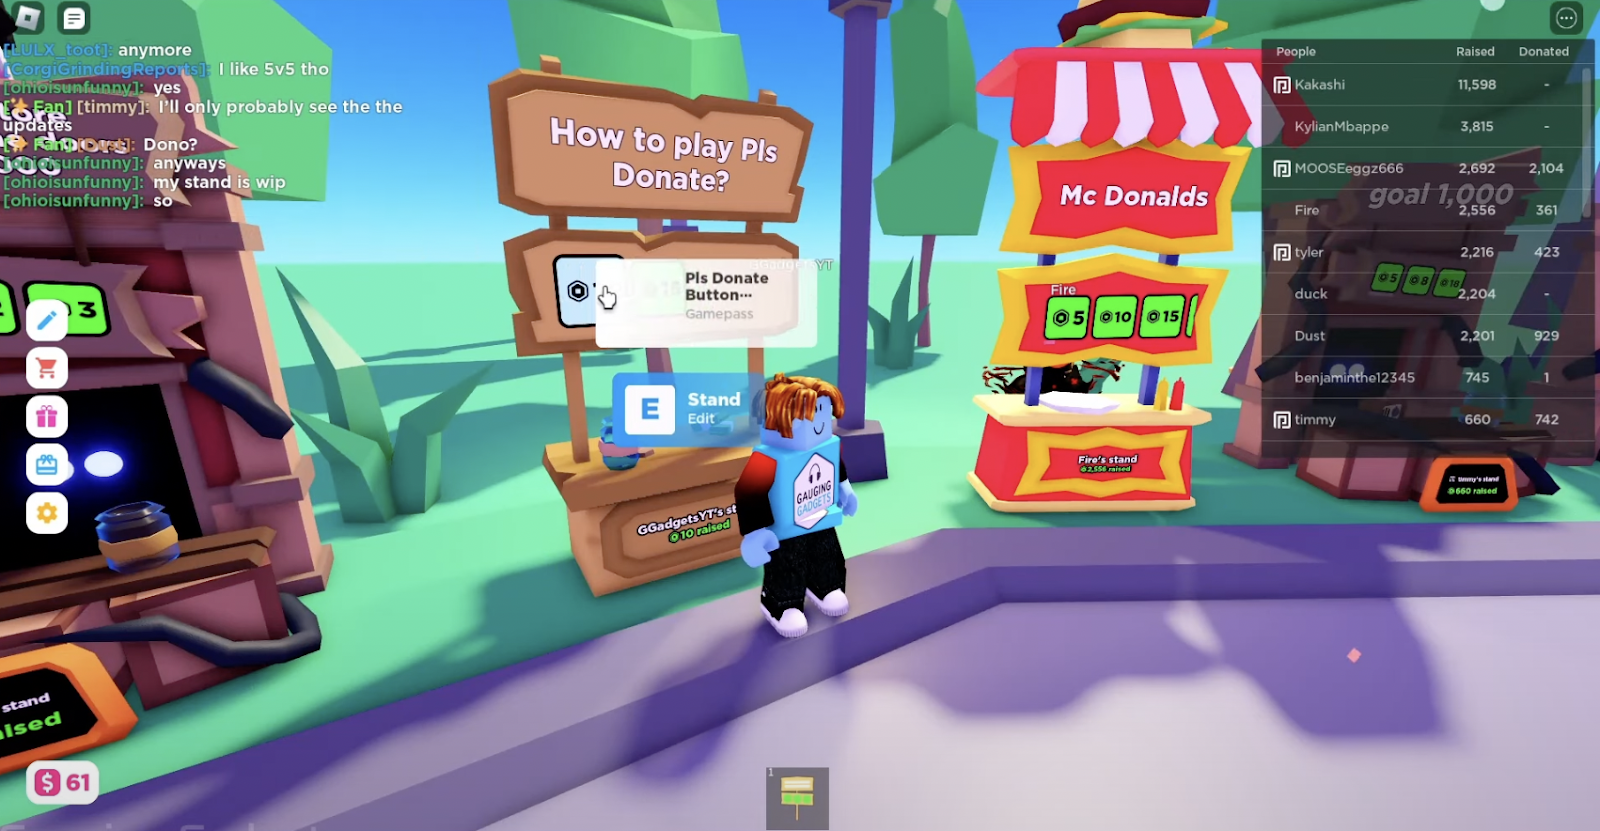 Roblox Pls Donate: How to play, features, and more